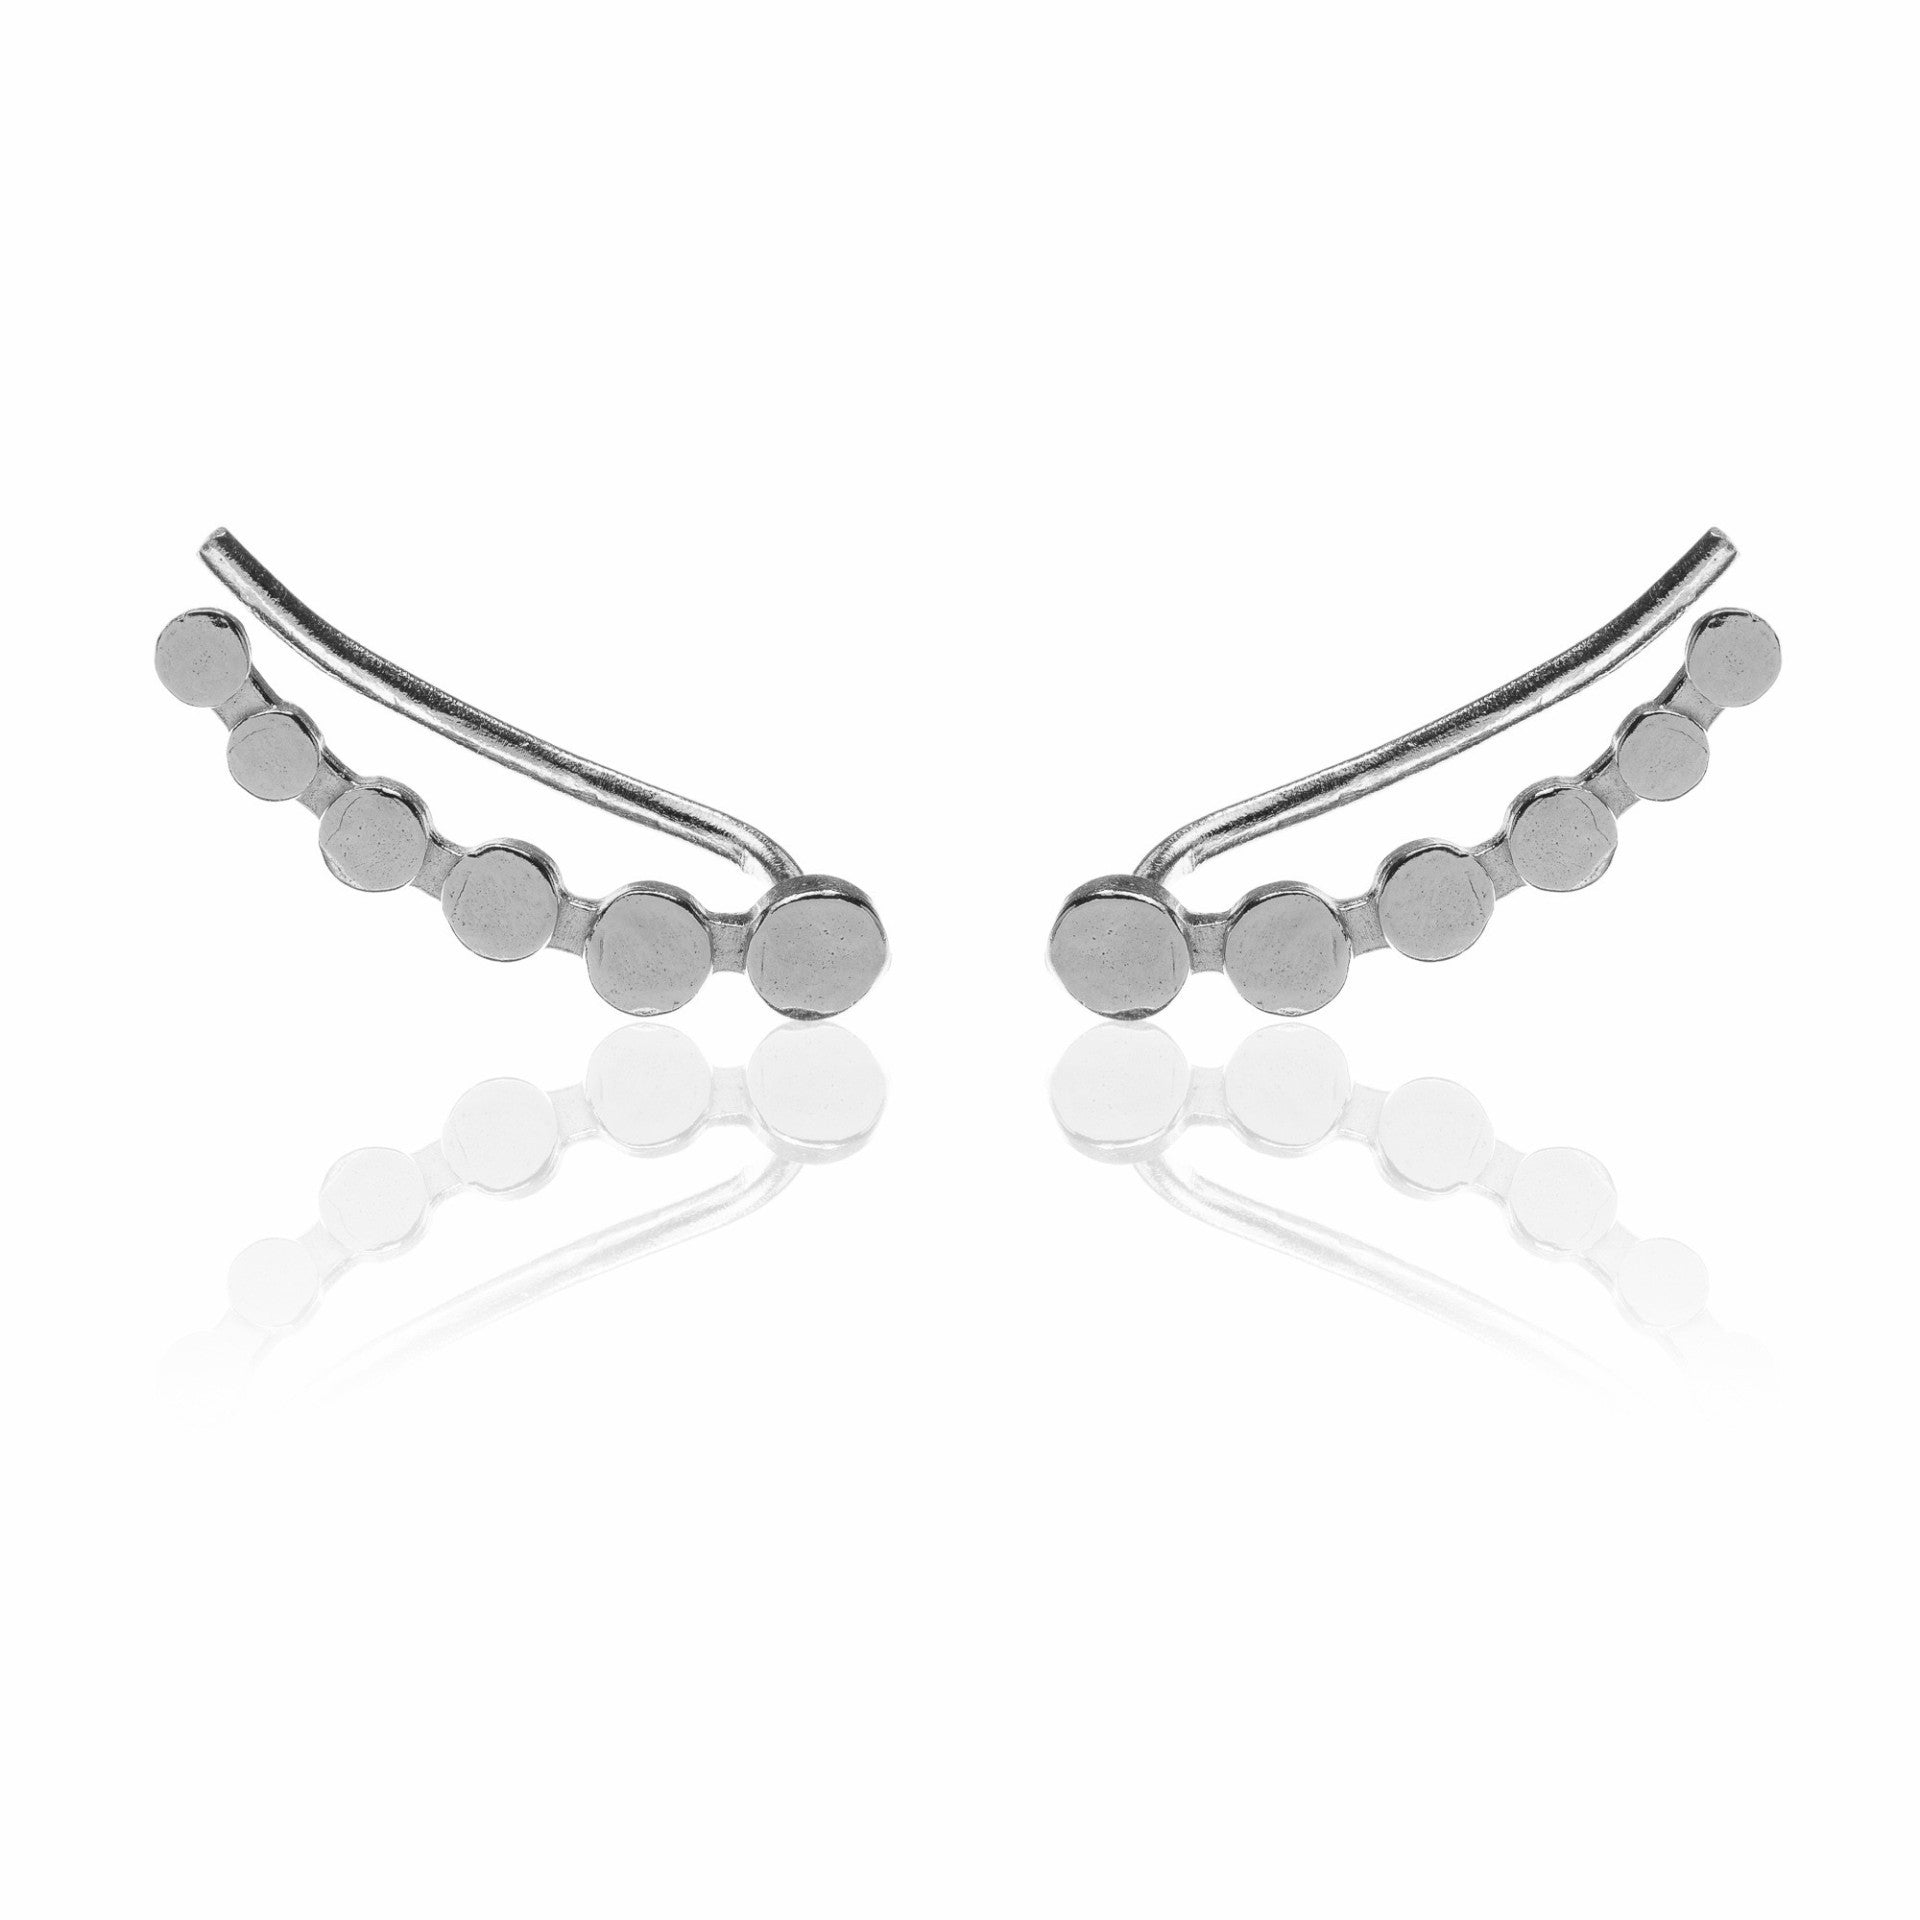 Climbing Points earring